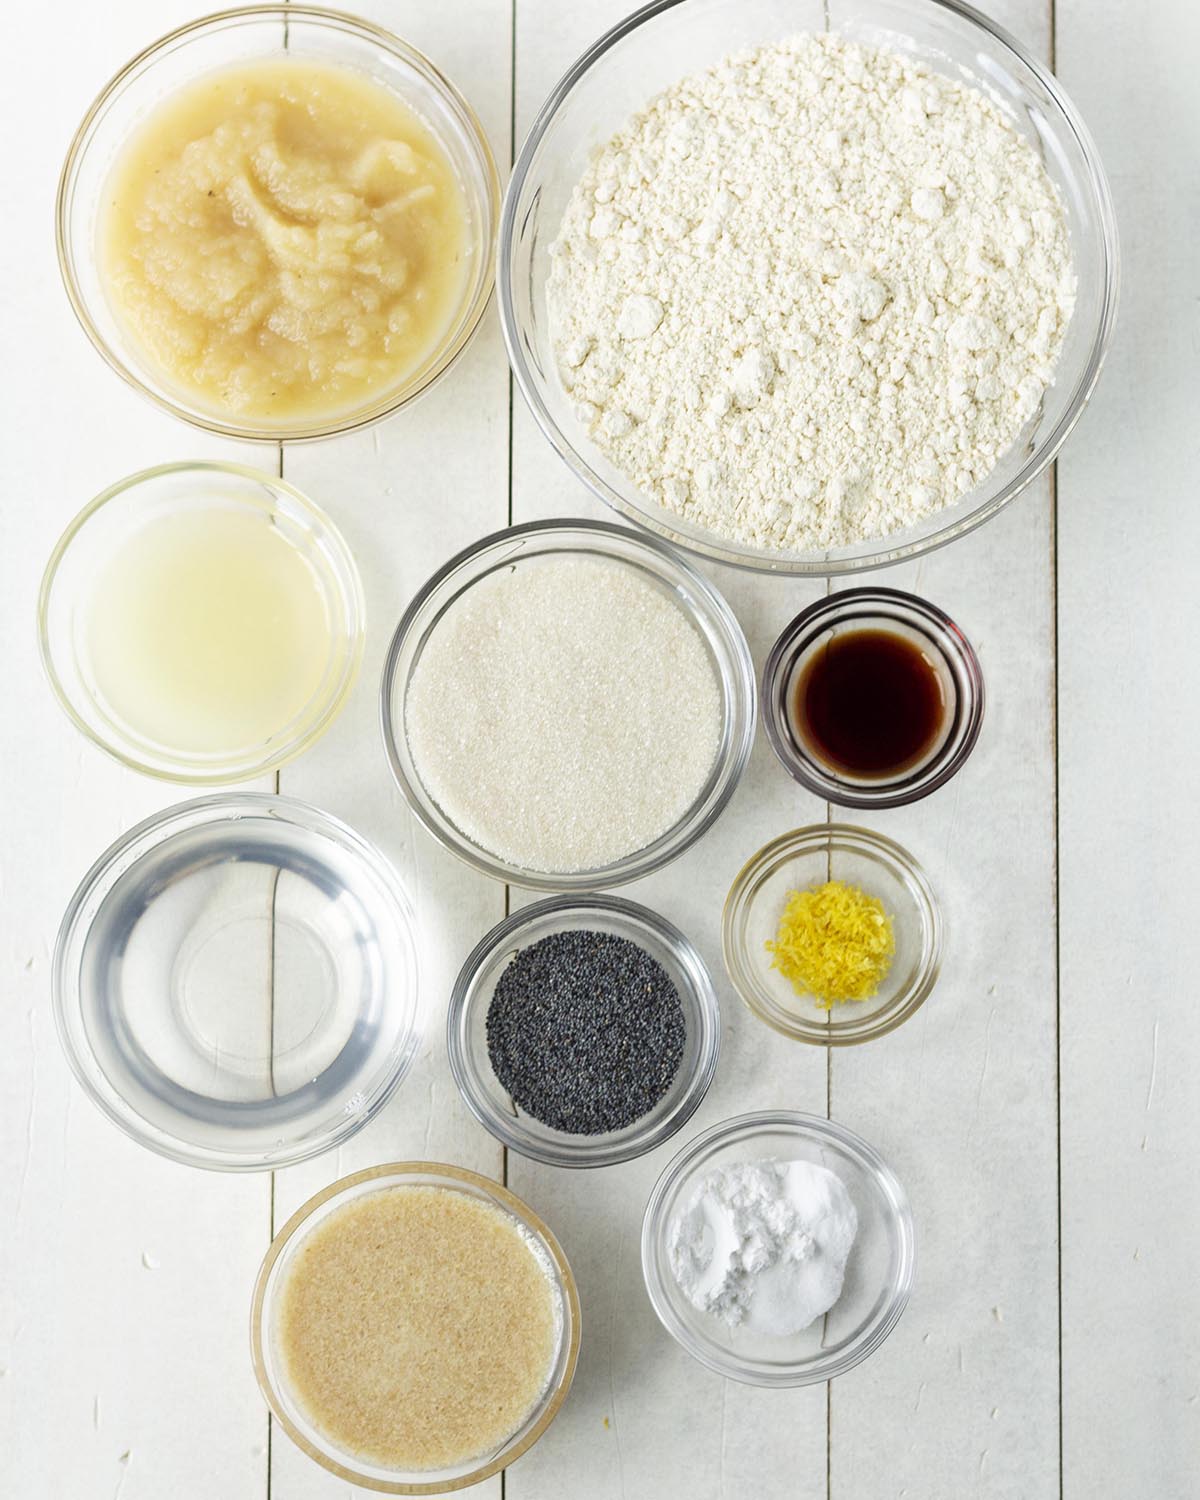 Overhead shot of all the ingredients needed to make glutenfree lemon poppy seed muffins.